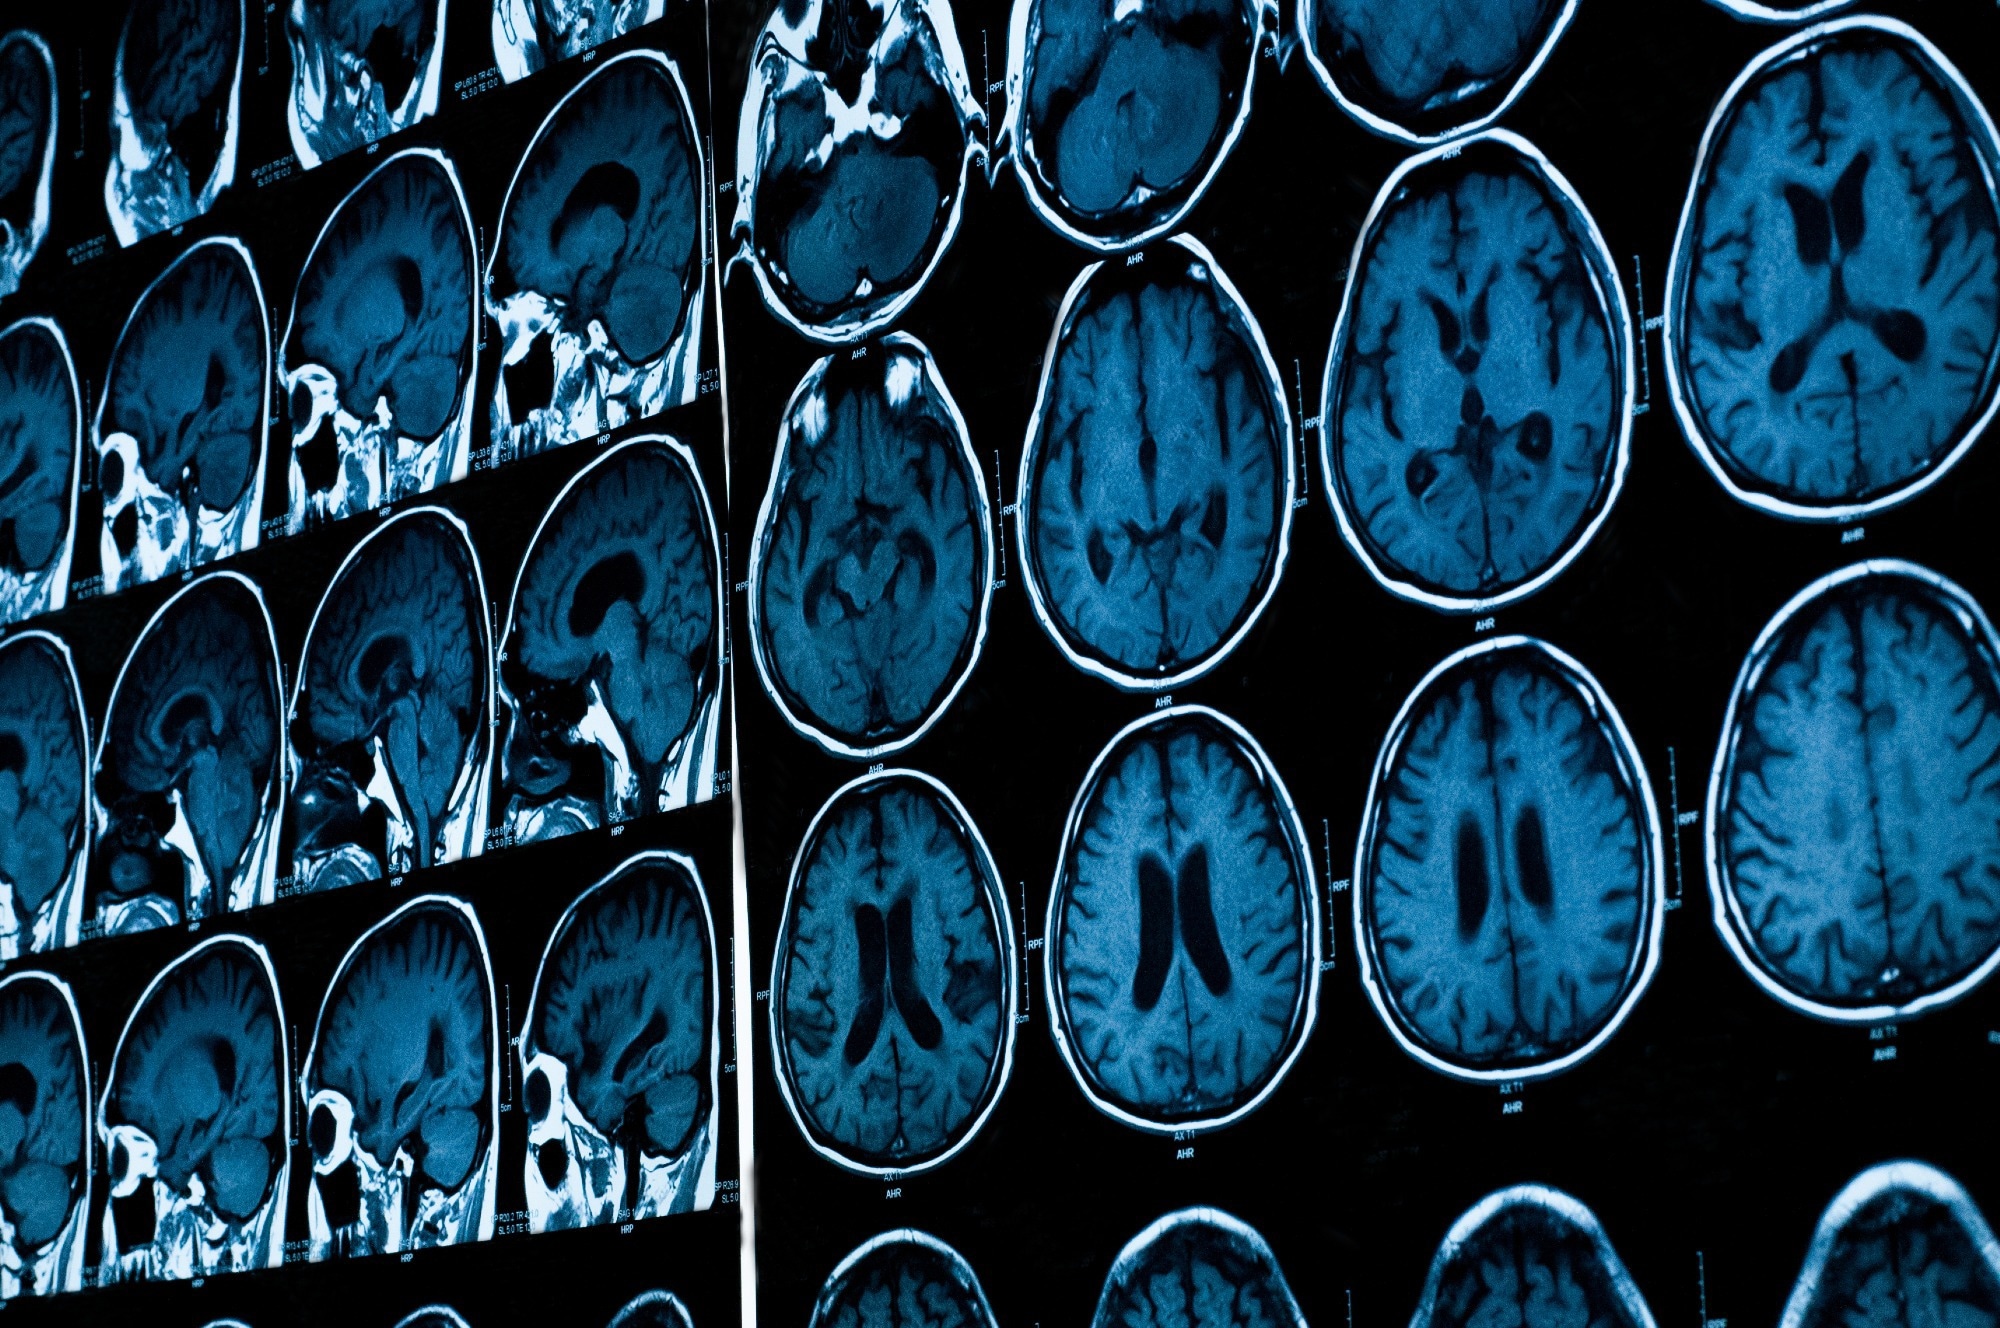 Study: Adverse Life Experiences and Brain Function: A Meta-Analysis of Functional Magnetic Resonance Imaging Findings. Image Credit: Tushchakorn / Shutterstock.com